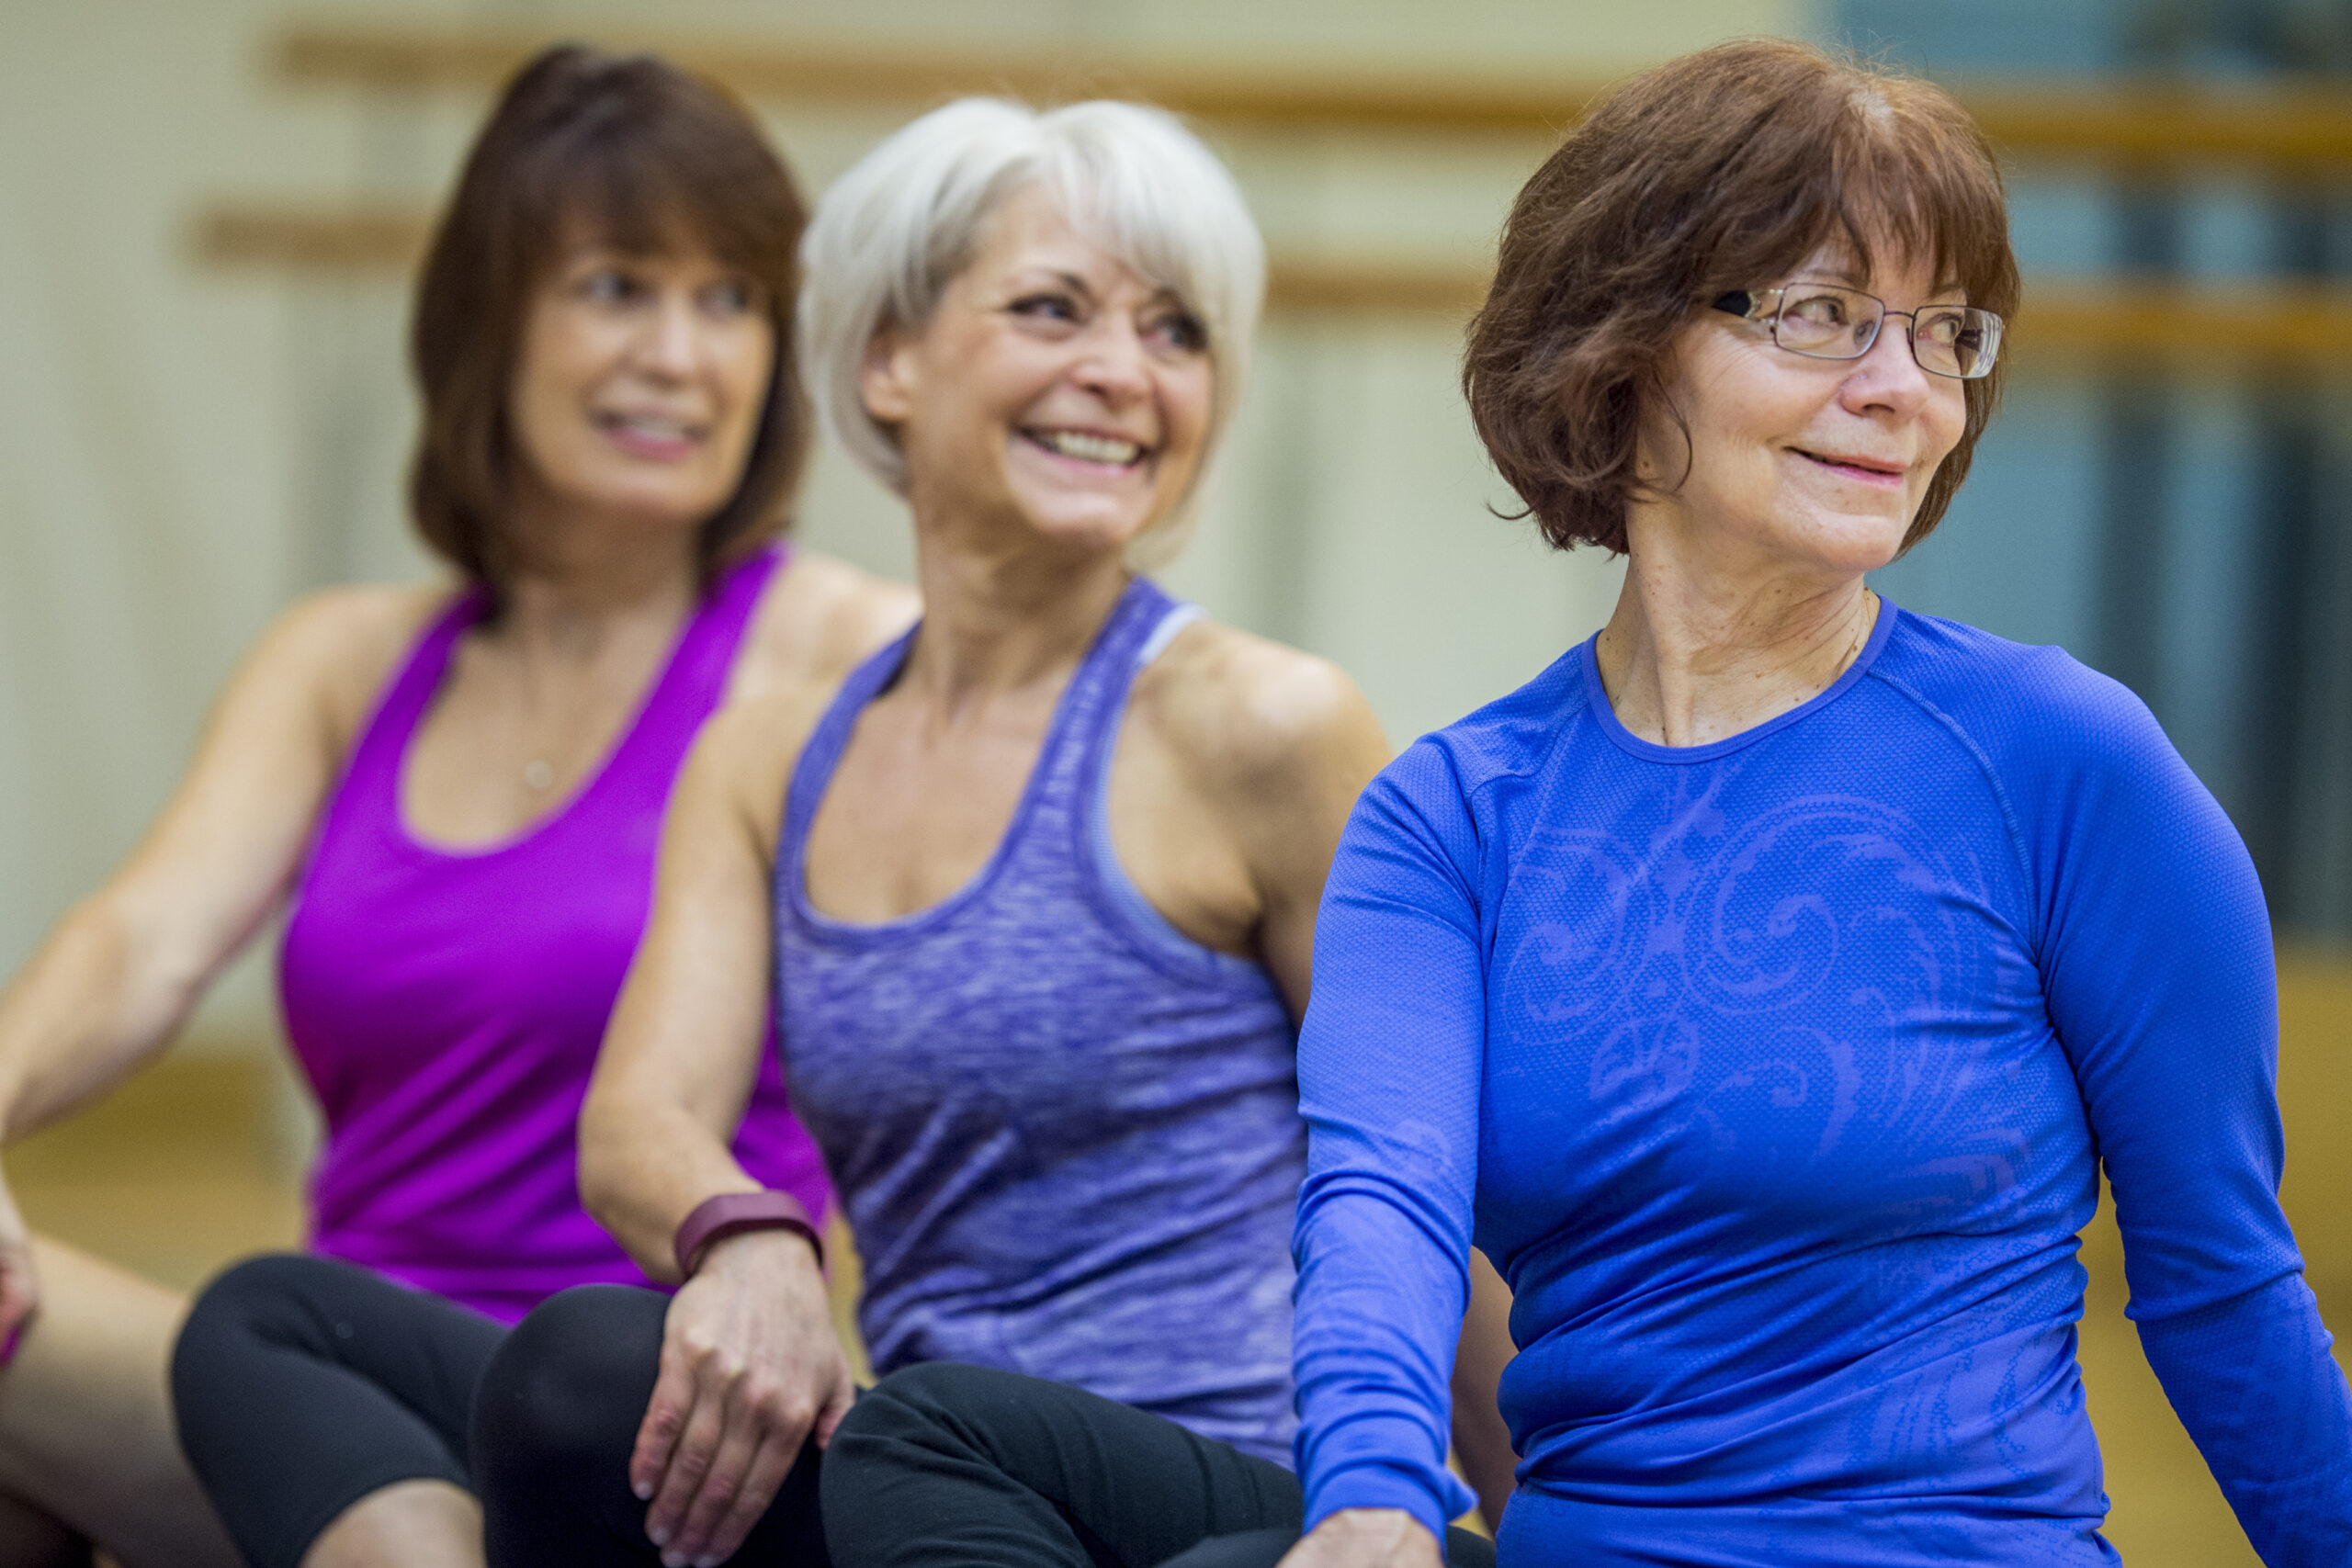 adult jazz class smiling while their learn more jazz steps